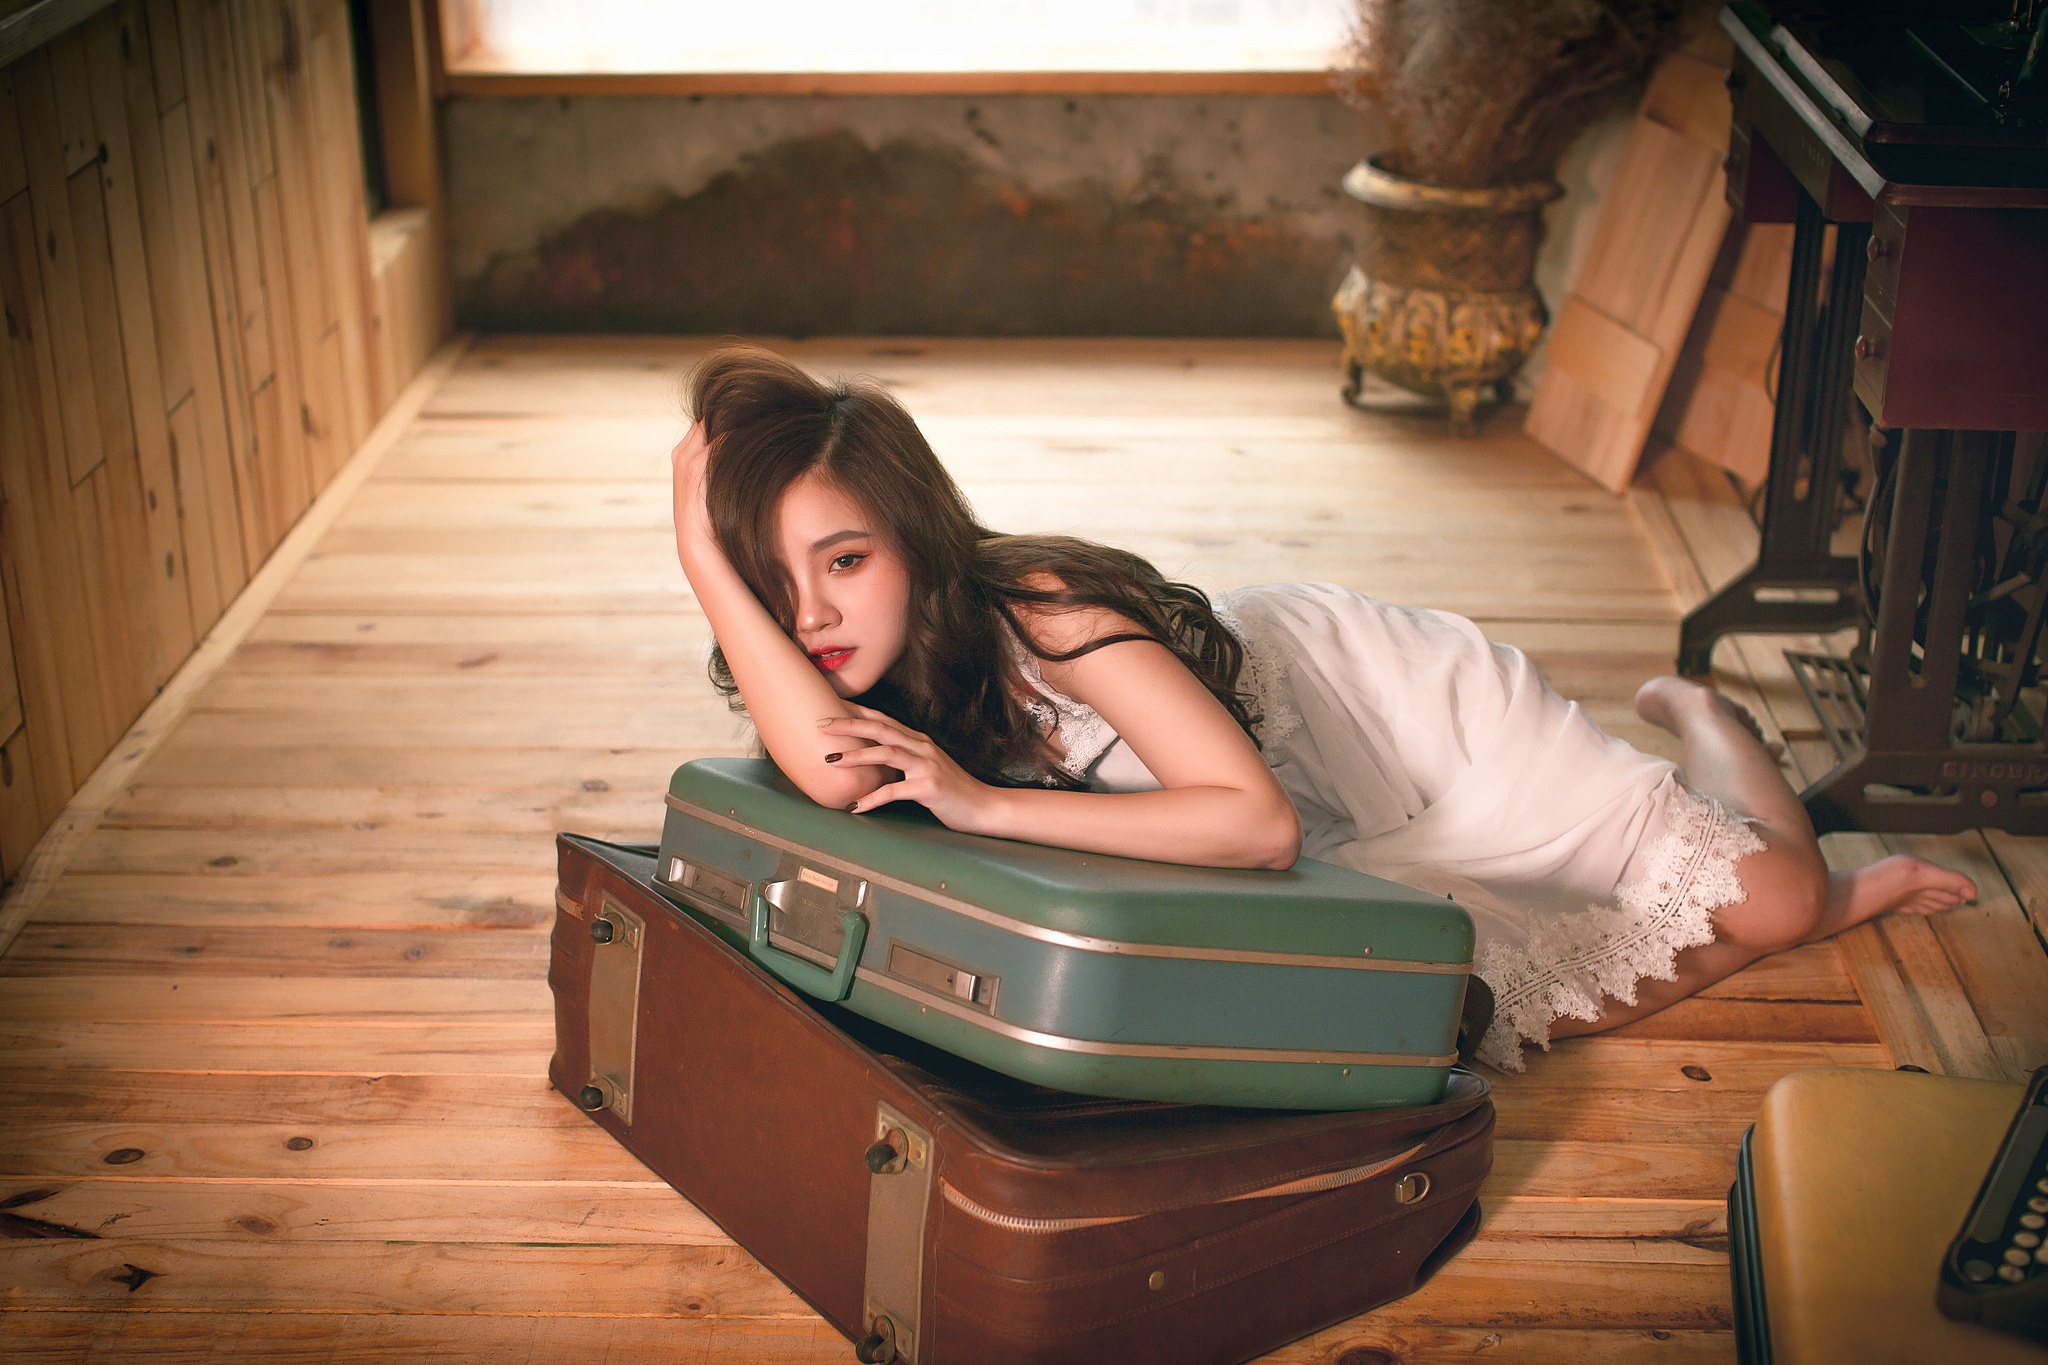 People 2048x1365 model red lipstick Asian hands in hair white clothing long hair lying on front suitcase women brunette women indoors